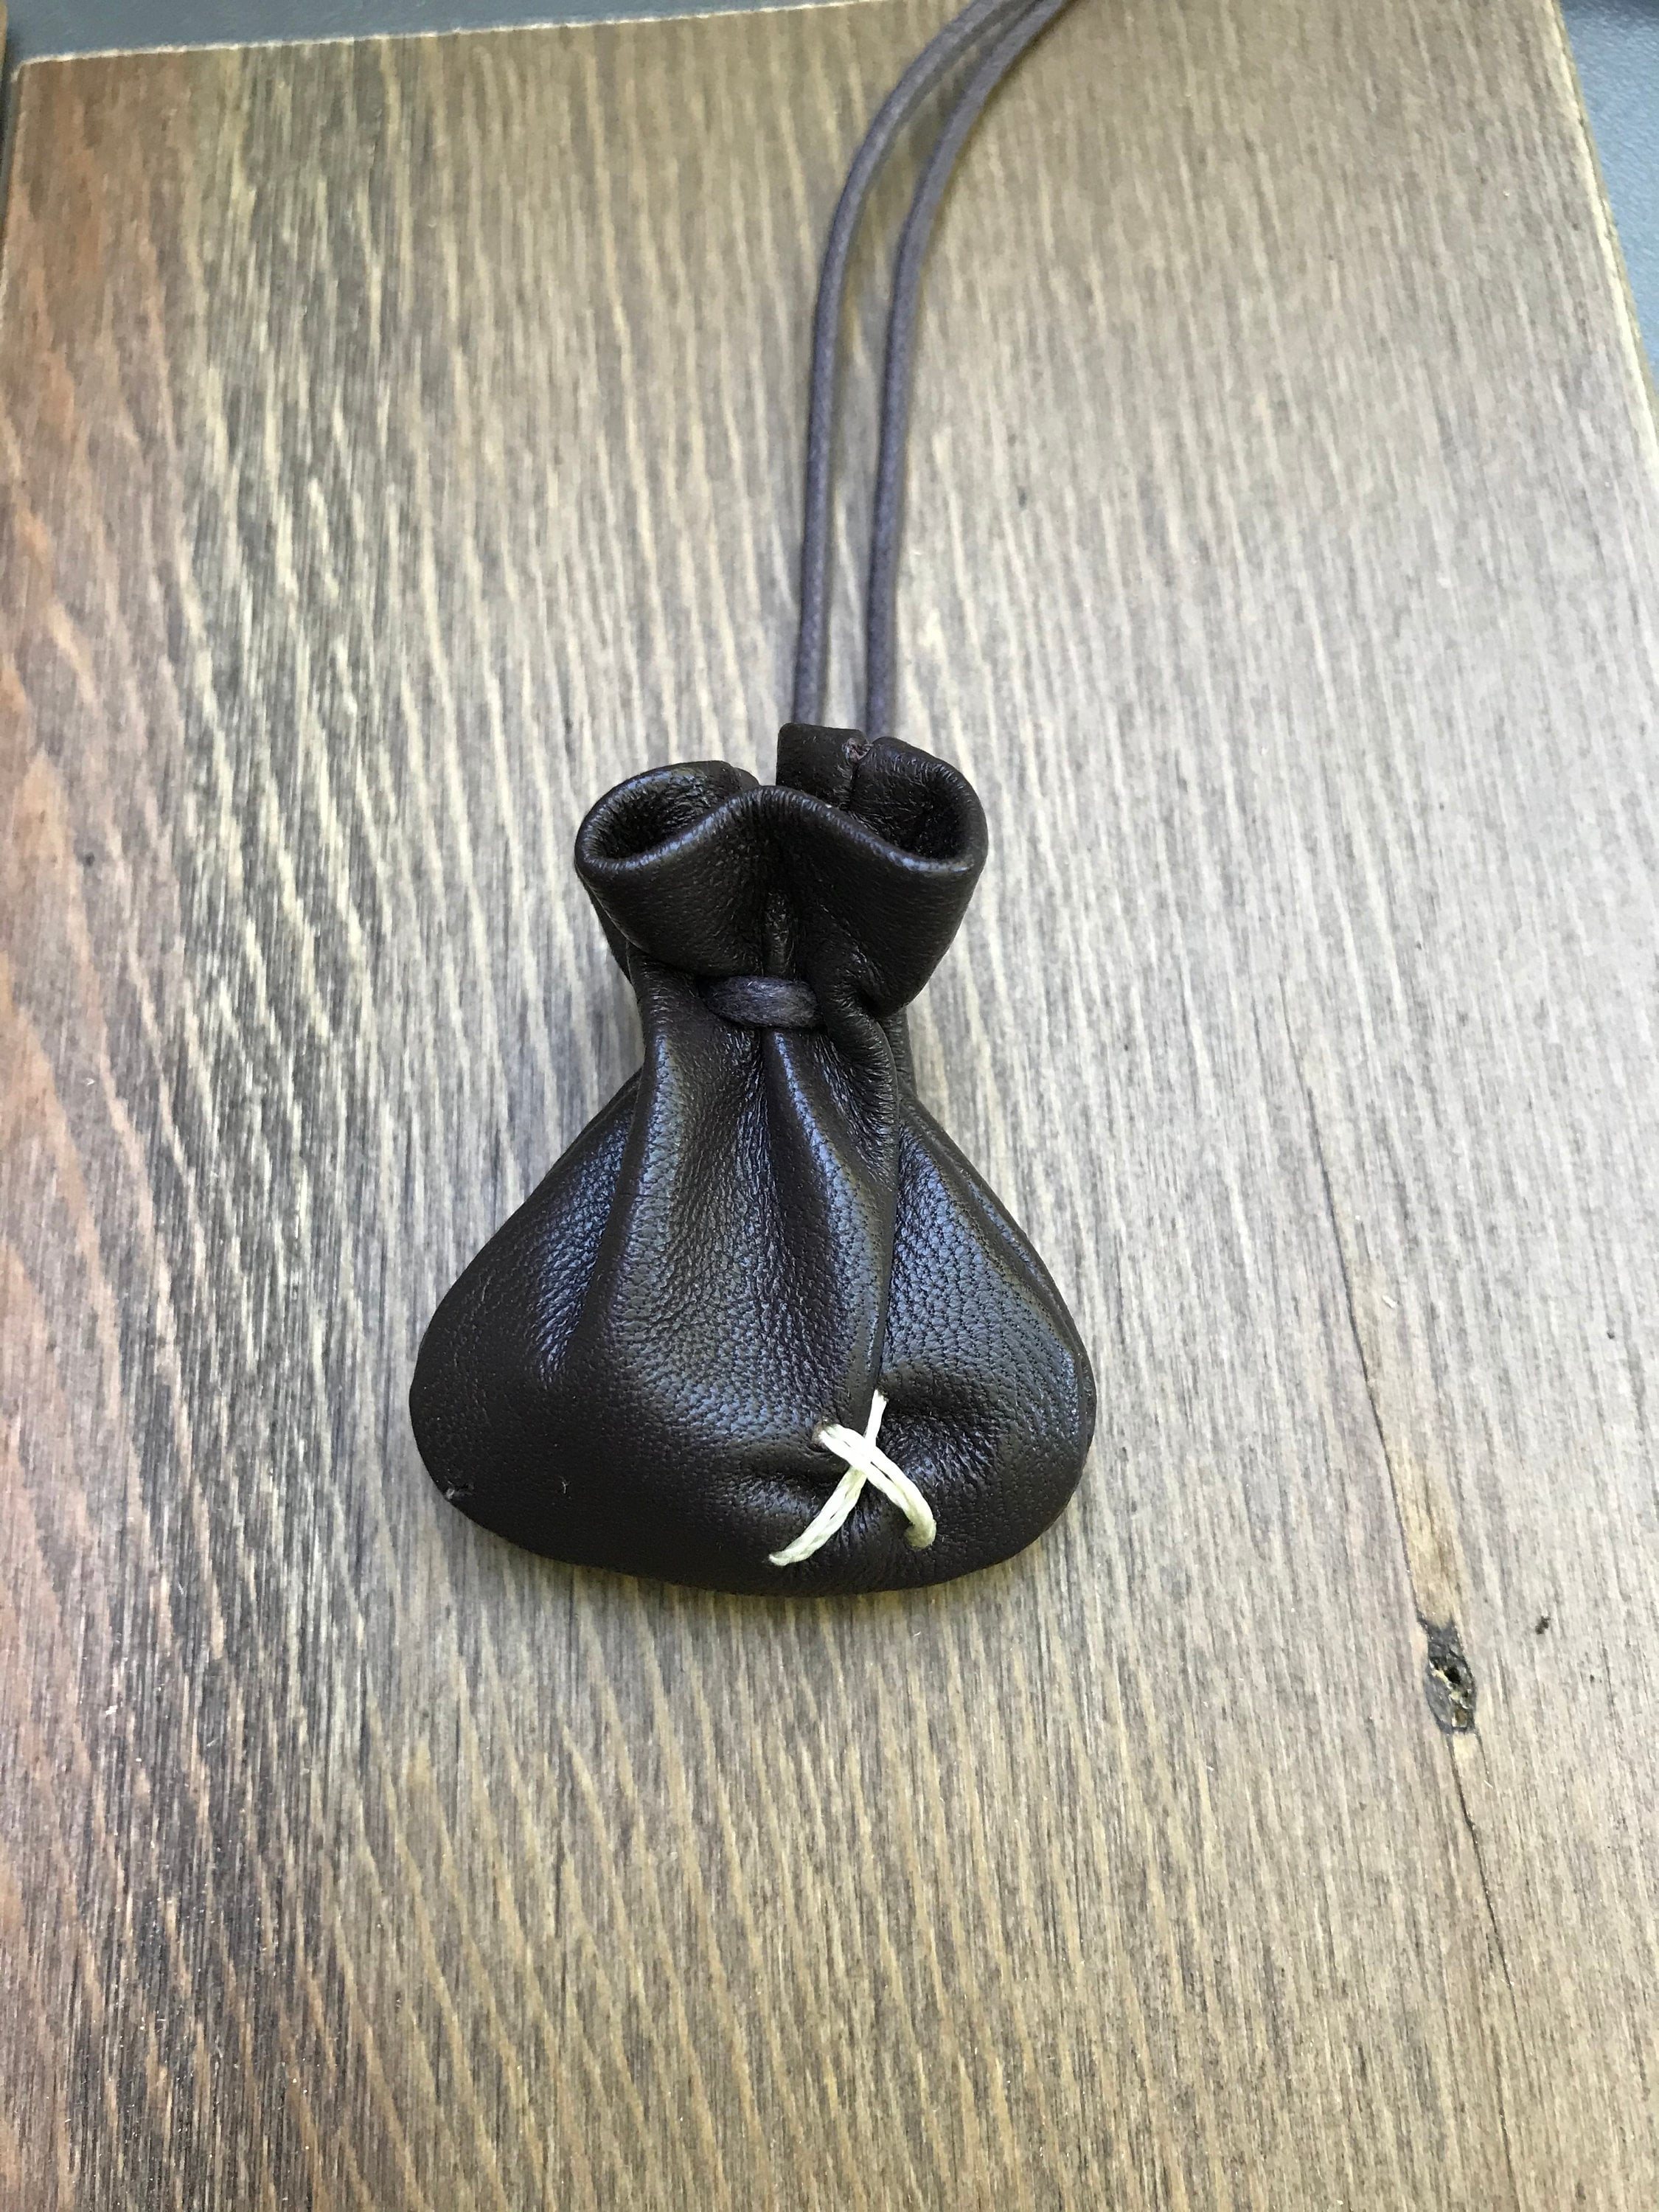  Small Black Leather Drawstring Medicine Tobacco  Pouch/Bag/Necklace by HJE : Everything Else